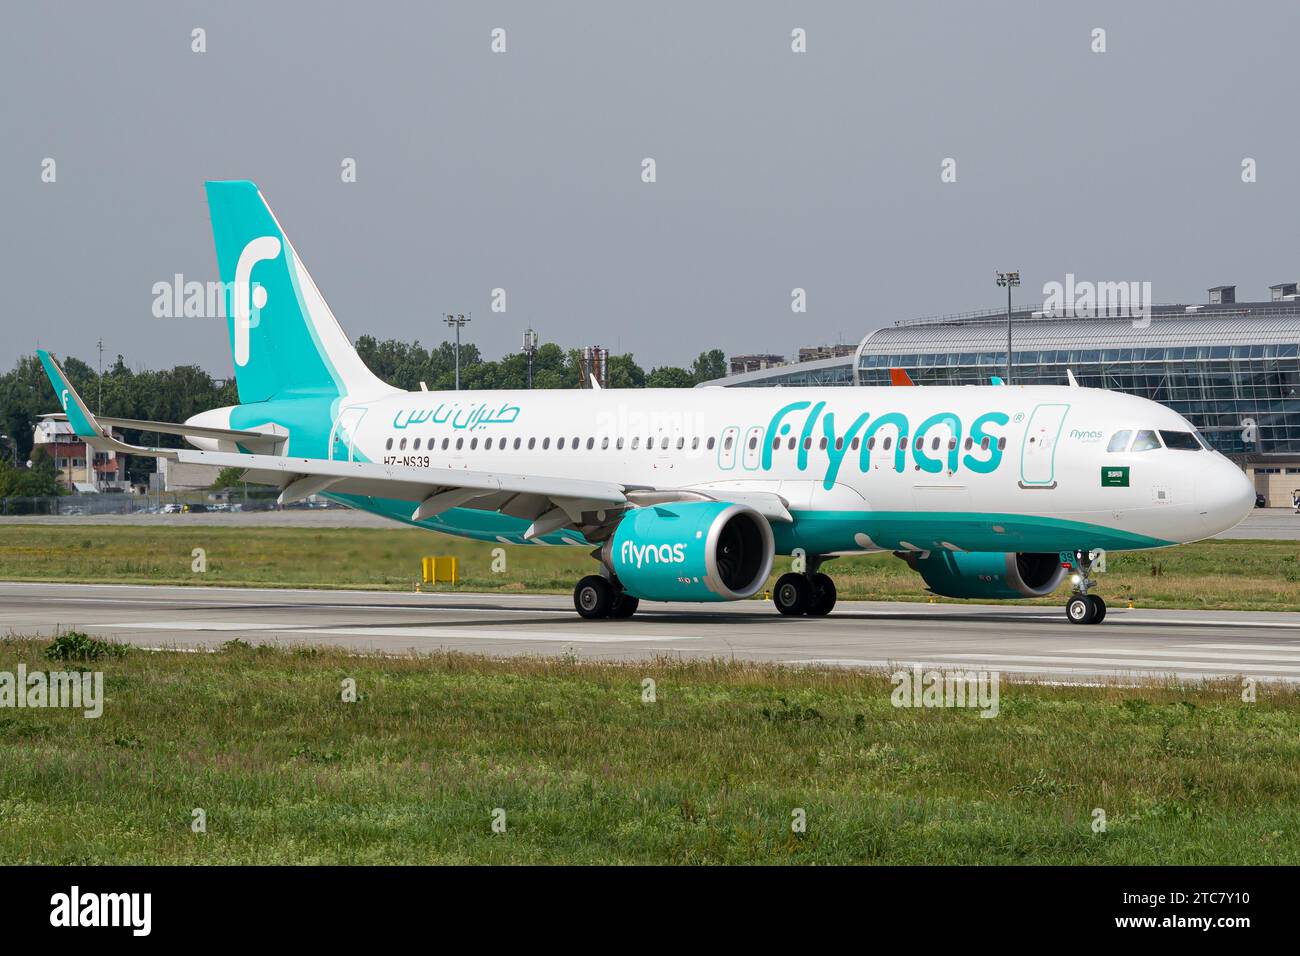 Saudi low-cost airline's Flynas Airbus A320 taxiing to the gates after landing at Lviv Airport after a flight from Riyadh Stock Photo